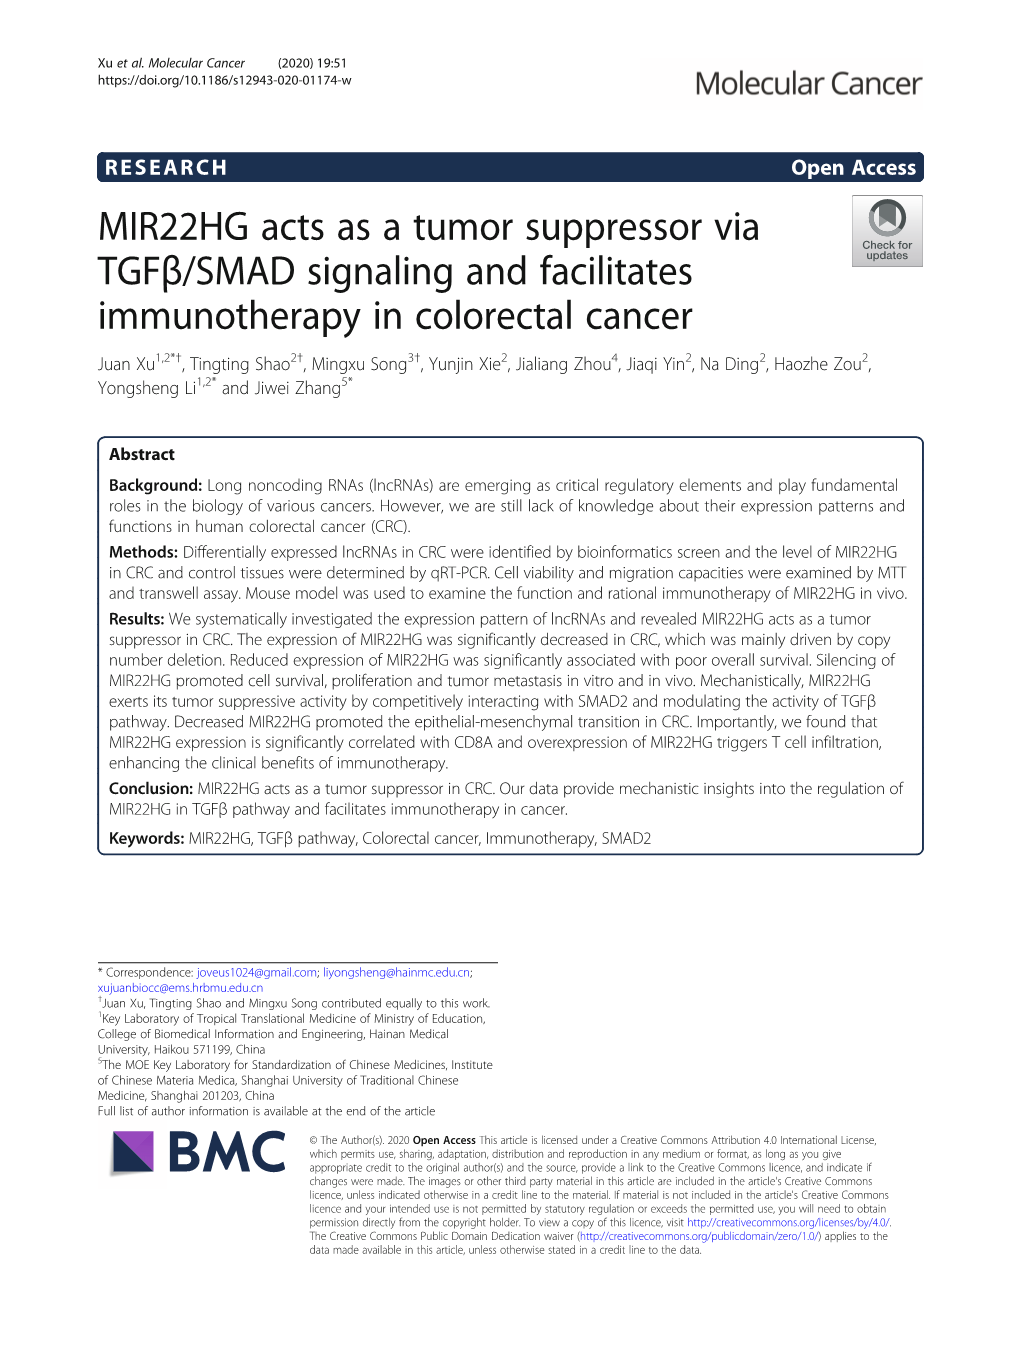 MIR22HG Acts As a Tumor Suppressor Via Tgfβ/SMAD Signaling And